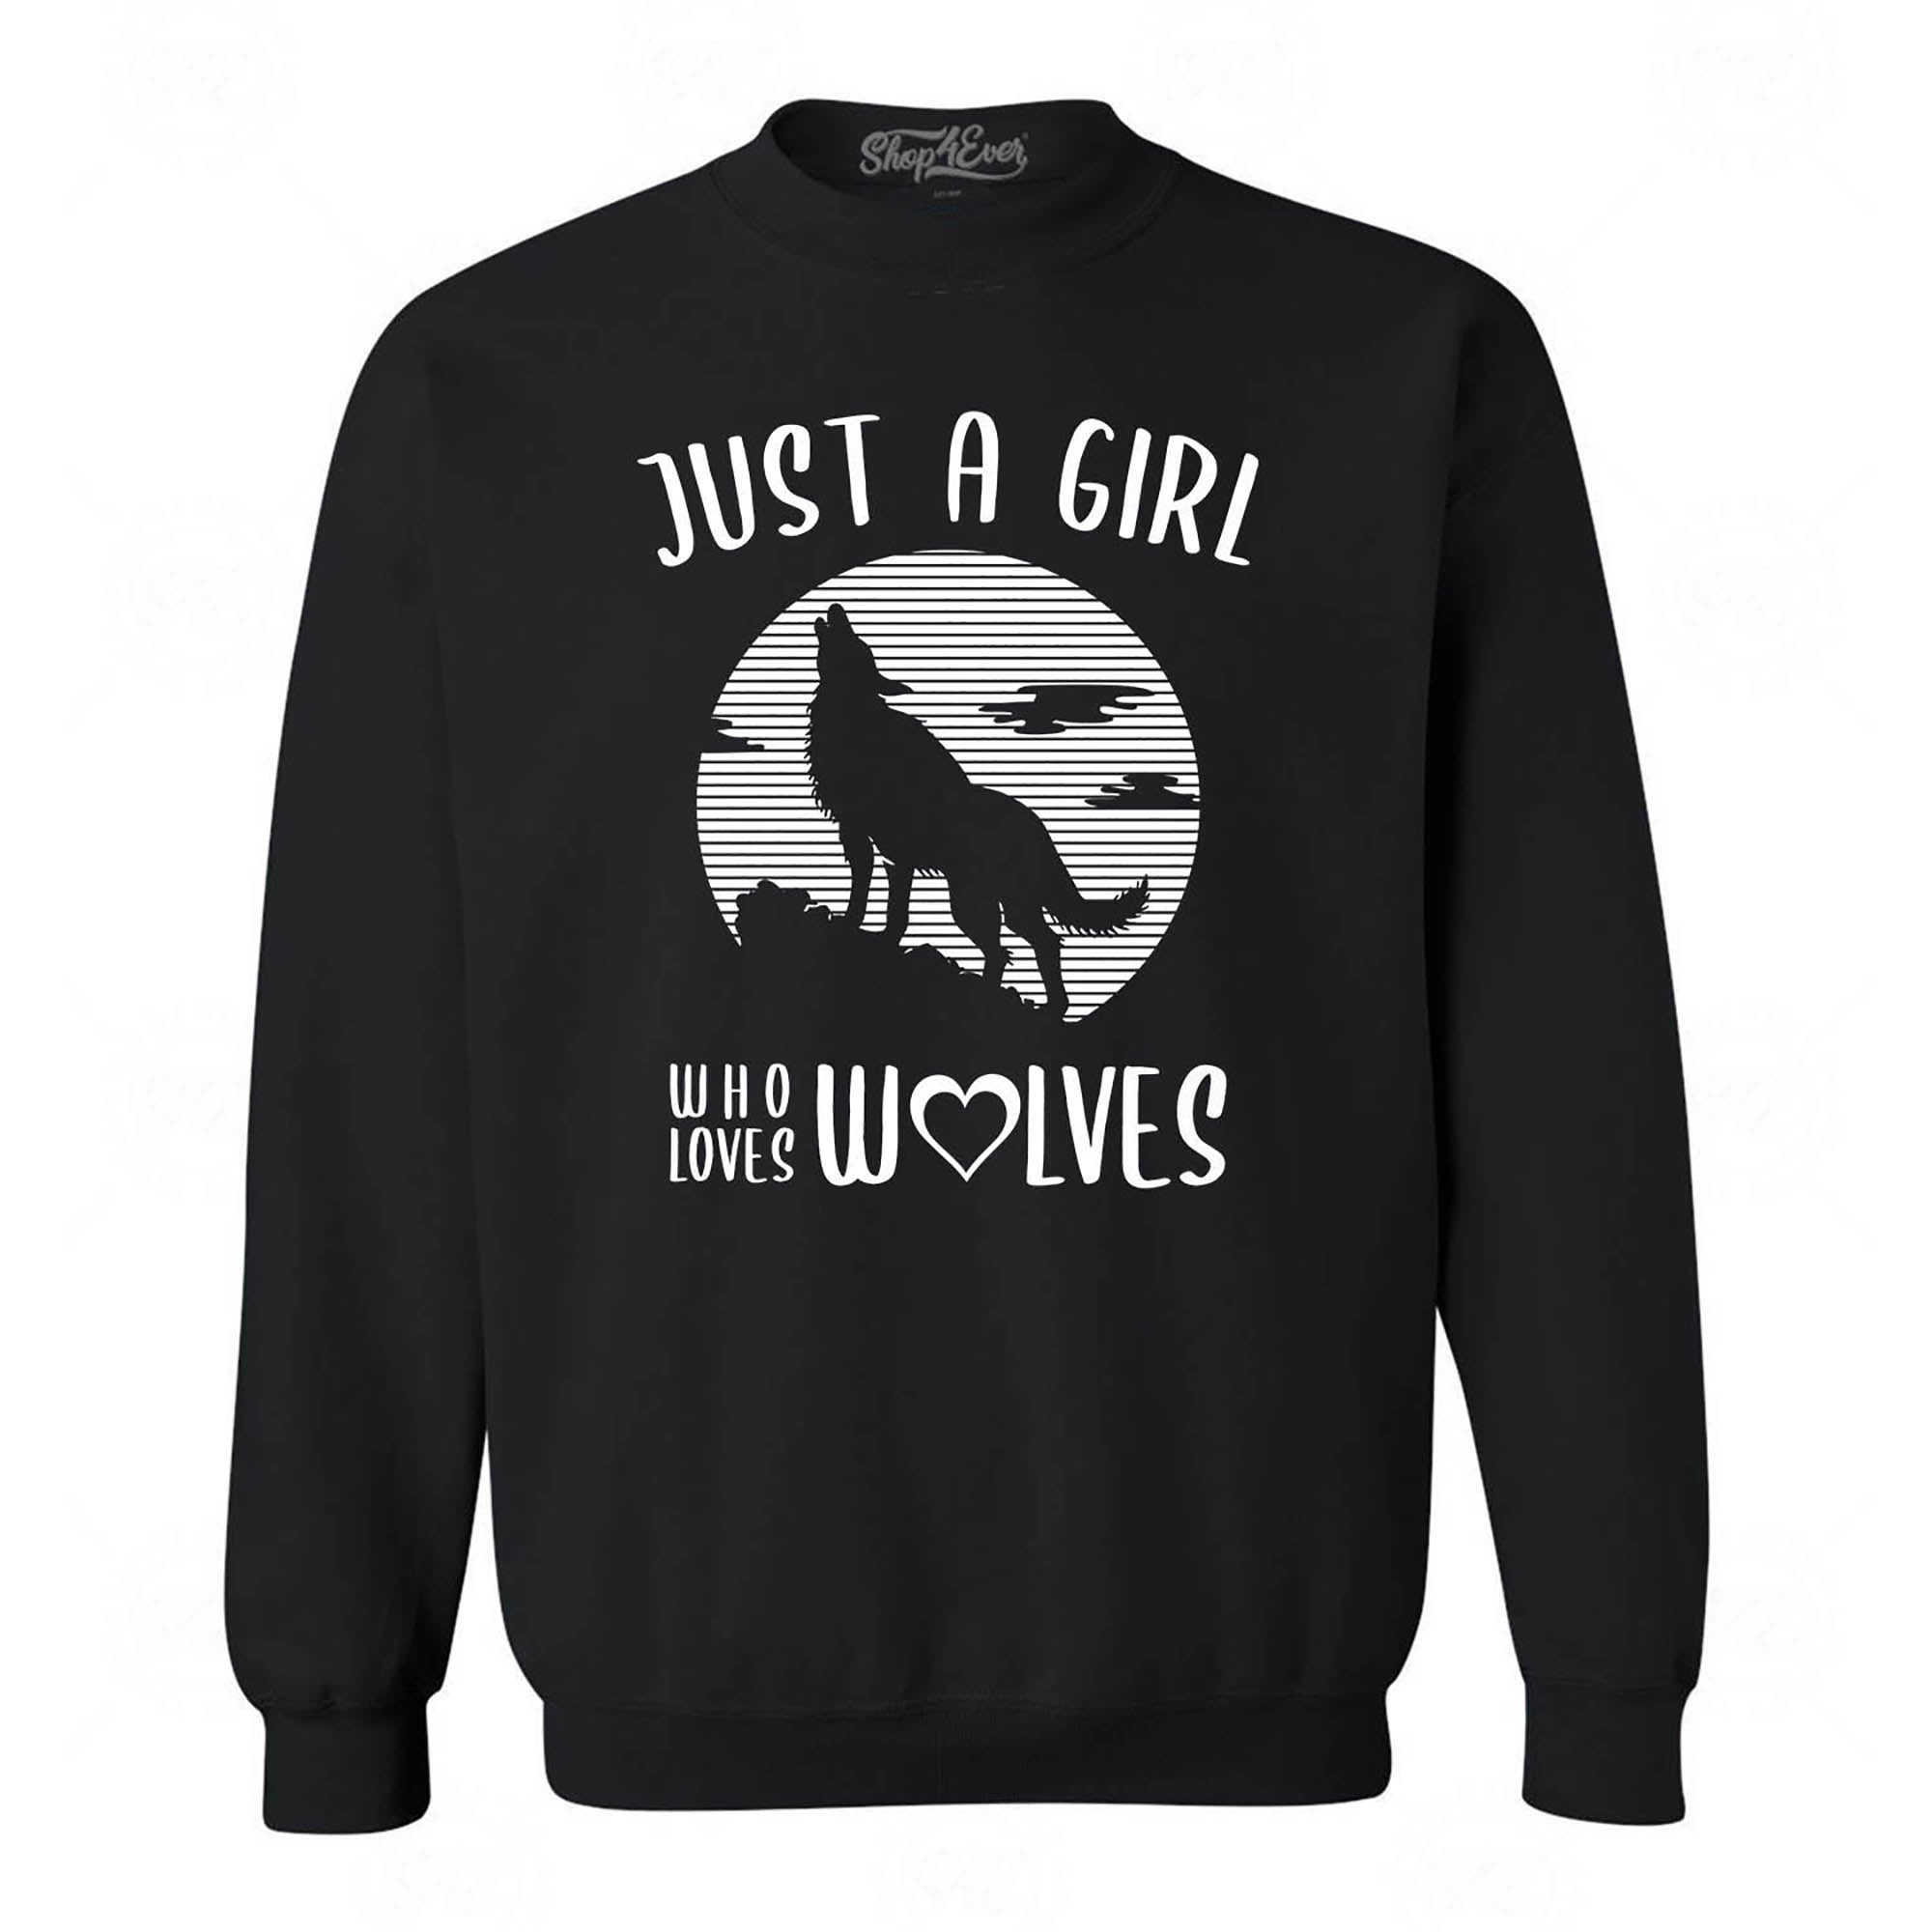 Just A Girl Who Loves Wolves Crewneck Sweatshirts